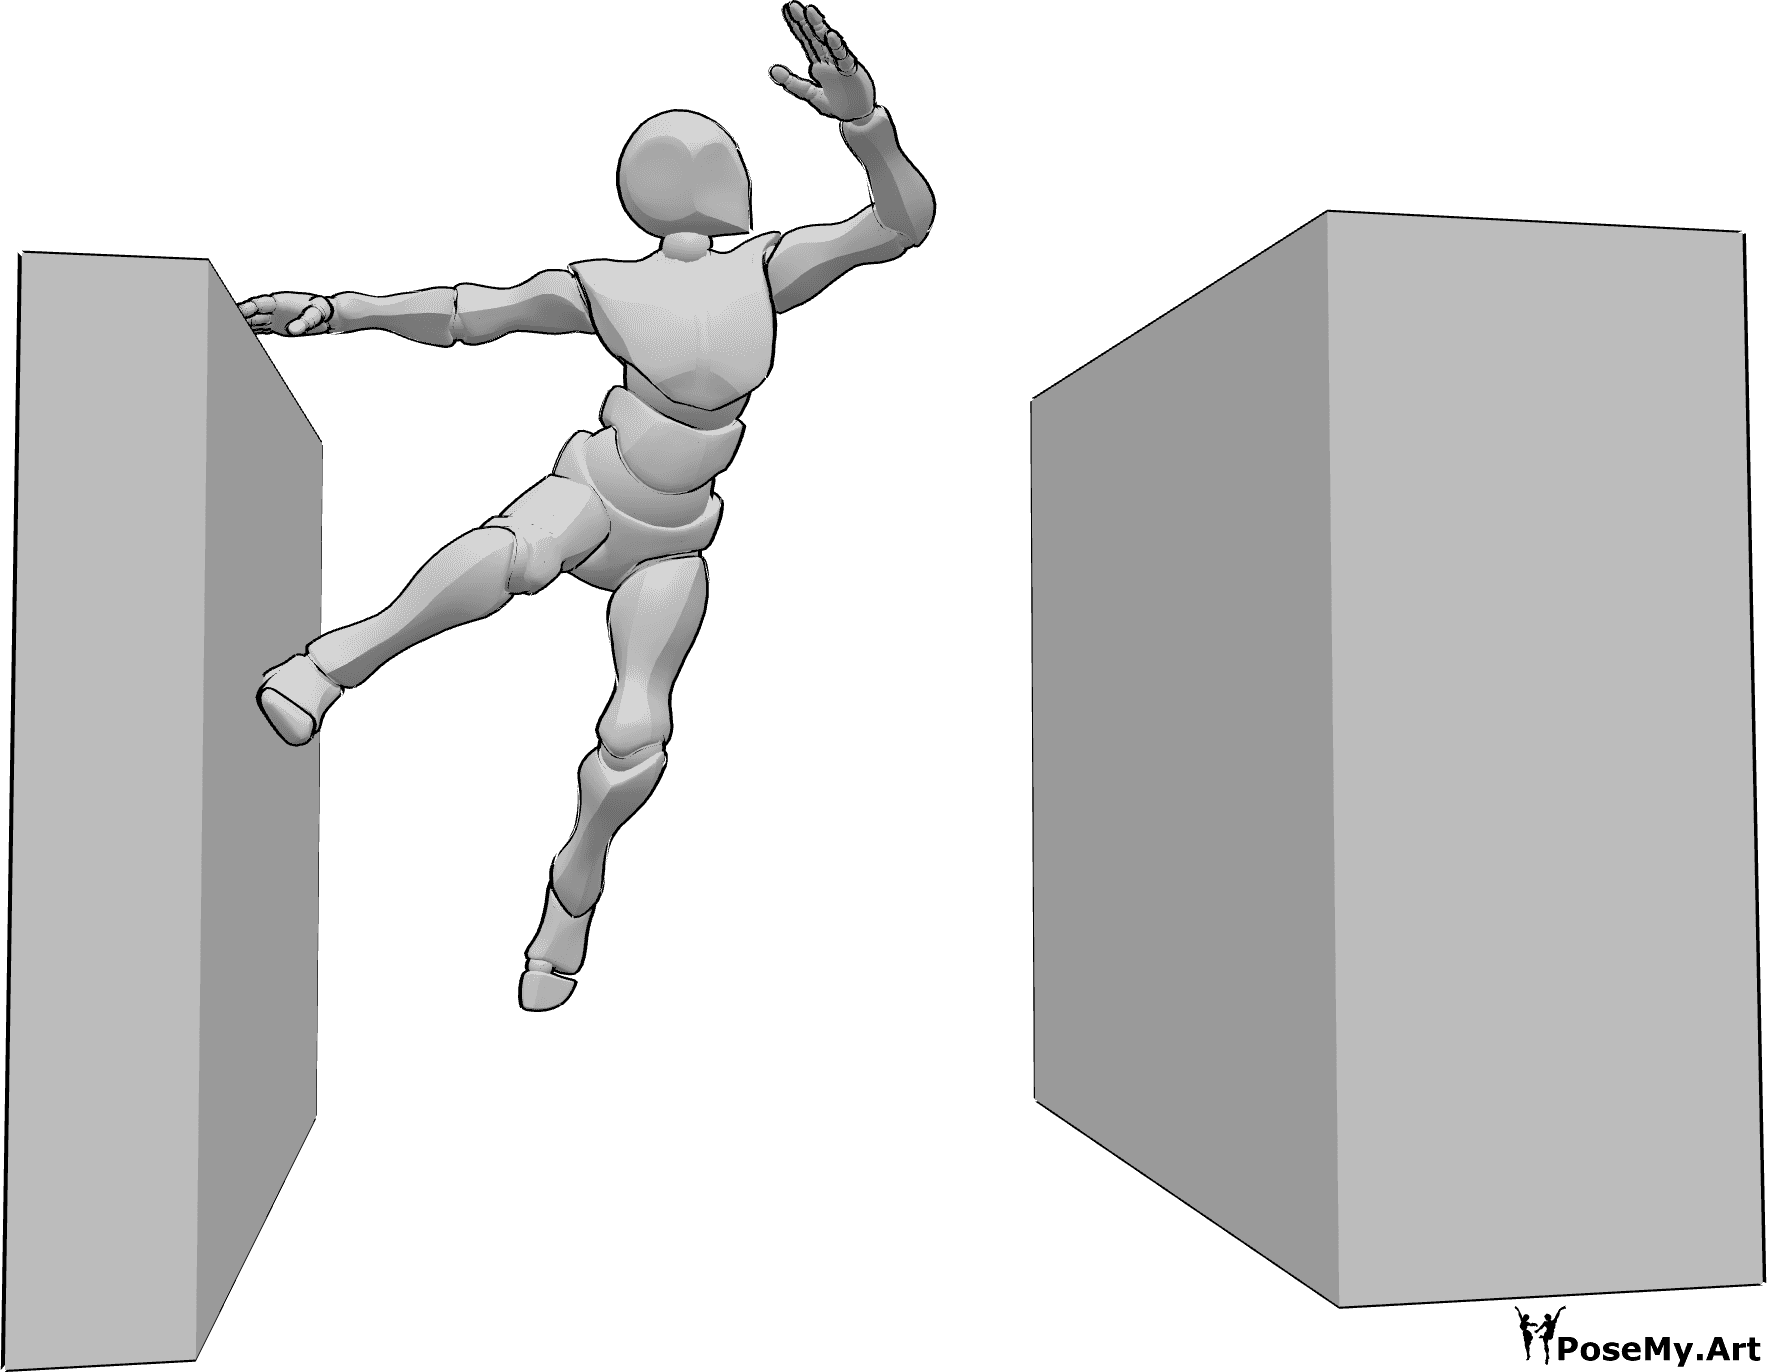 Pose Reference - Parkour jumping walls pose - Male is jumping on the walls, jumping from one wall to another